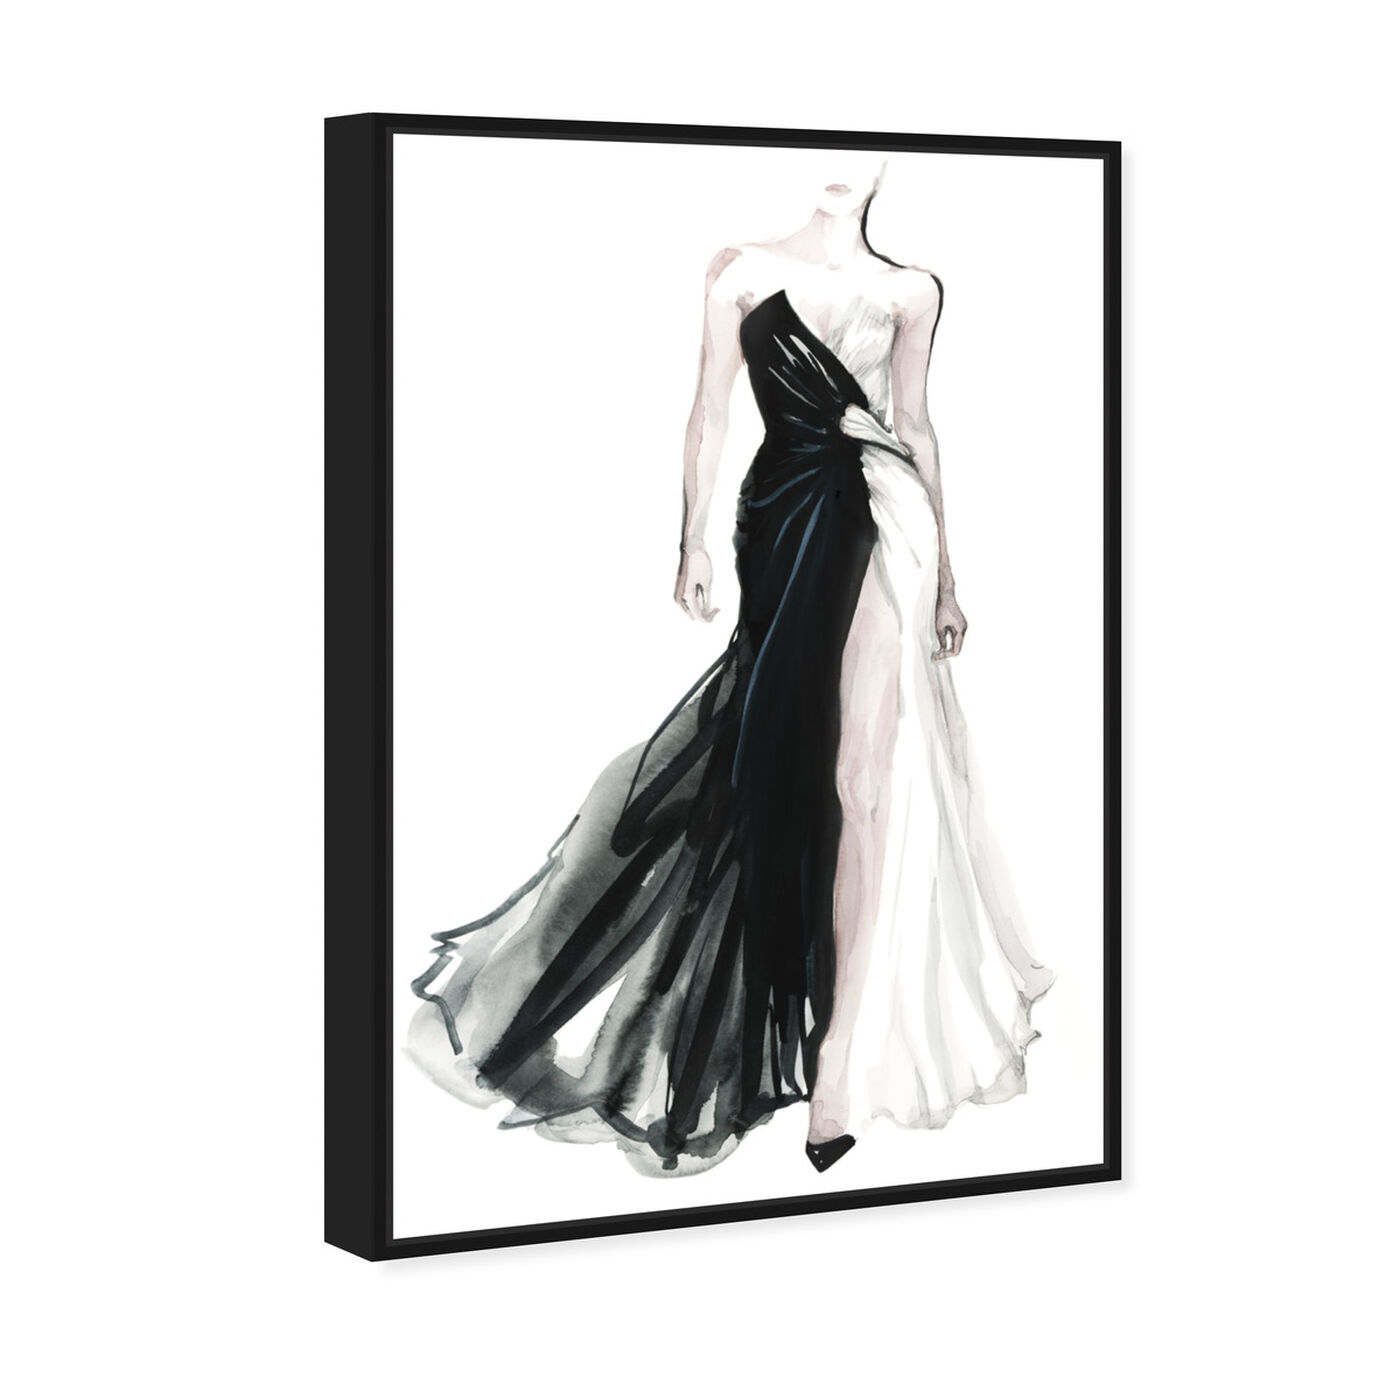 Angled view of Black and White Affair - Gill Bay featuring fashion and glam and dress art.